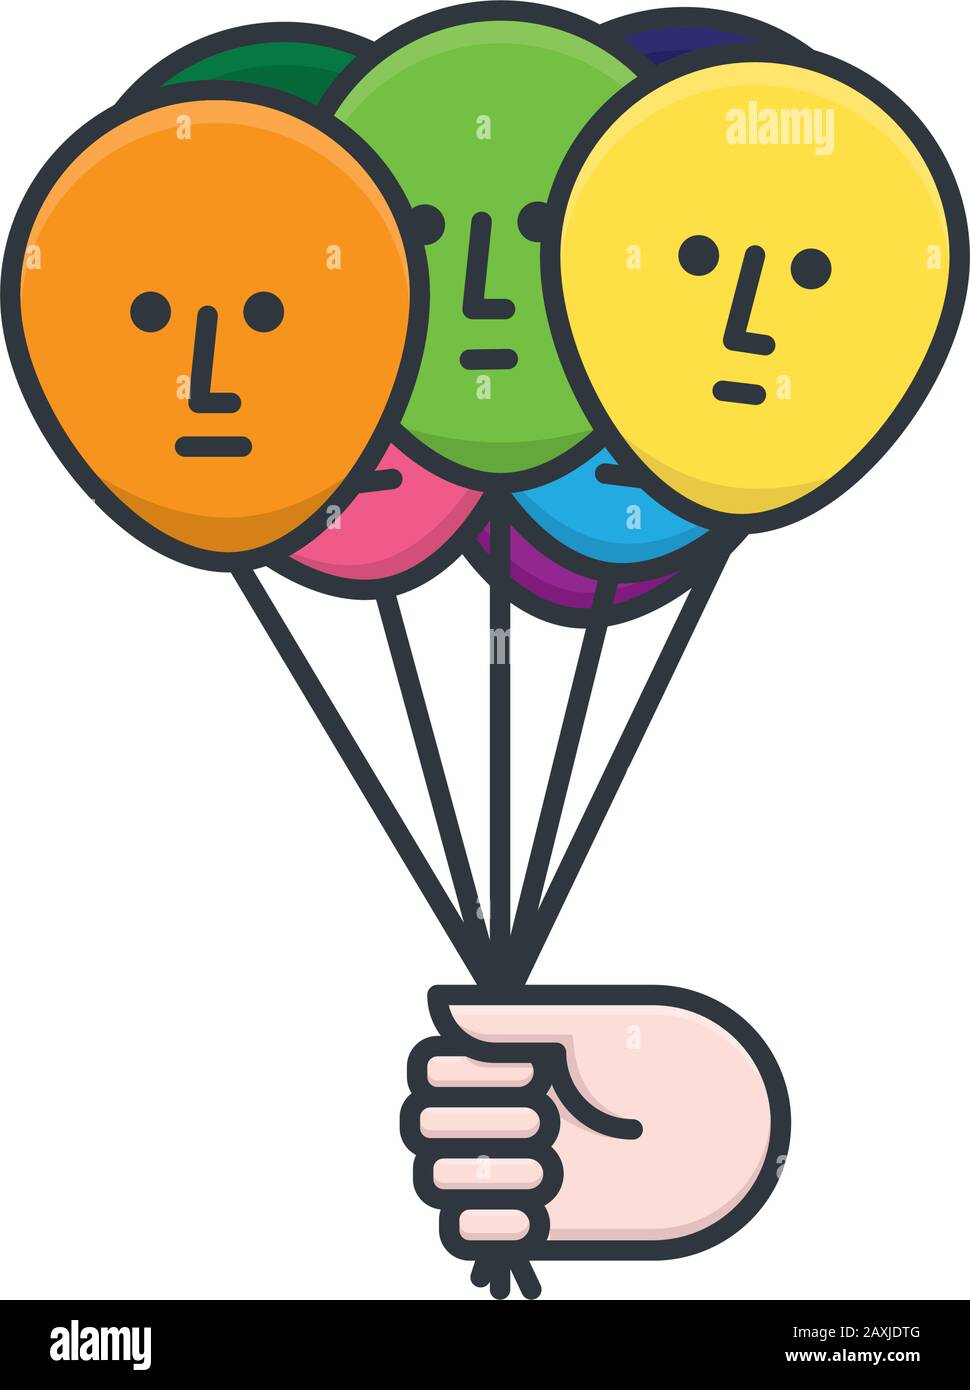 Dissoziative Identity Disorder Concept Vector Illustration for DissociativeIdentity Disorderday on March 5.Hand Holding Multicolored Ballons with FAC Stock Vektor